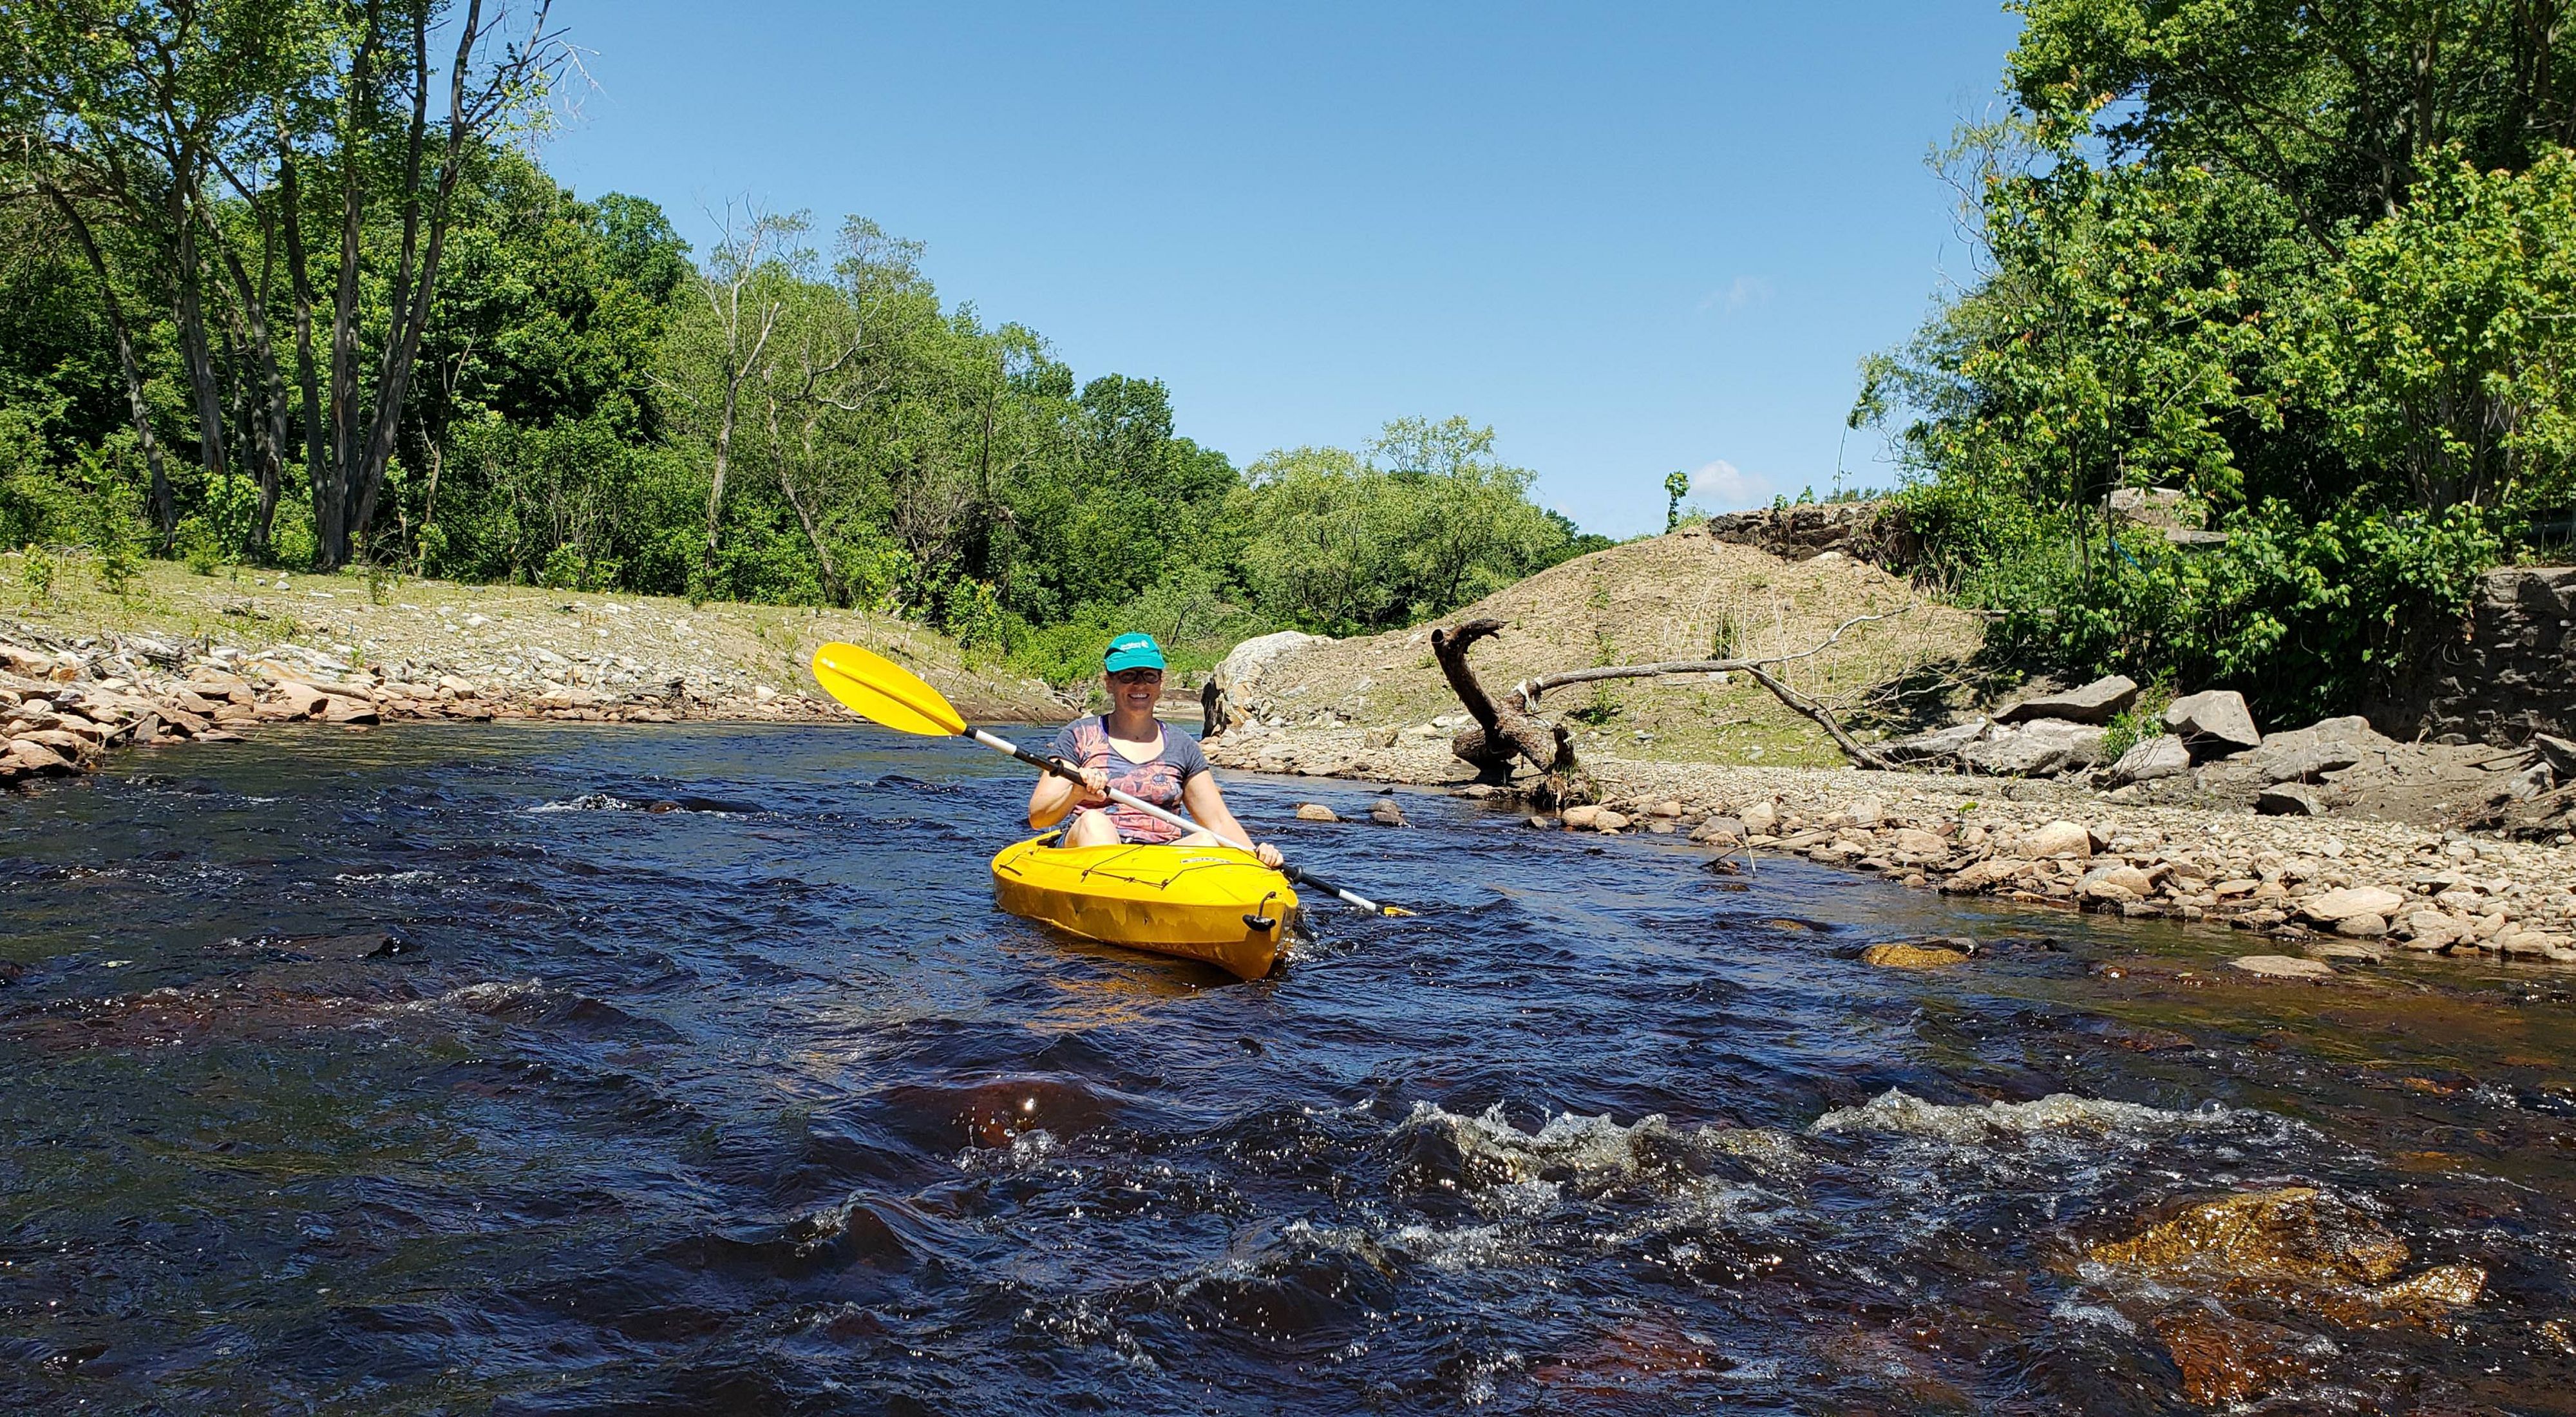 A woman kayaks toward the camera on the Mill River, which is surrounded by rocks and greenery.